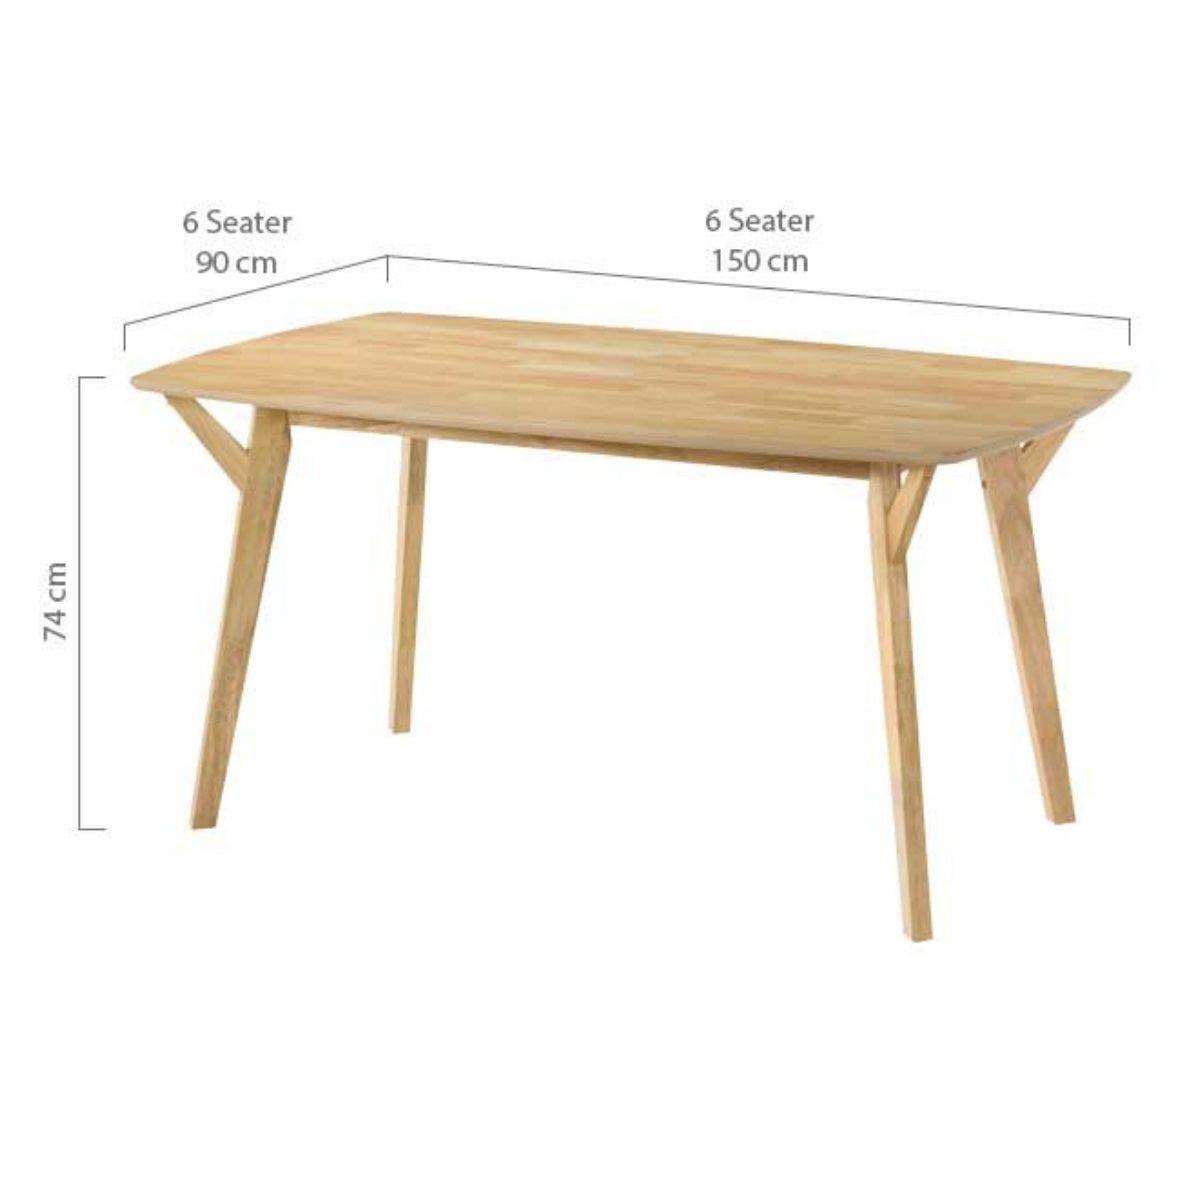 1.5m 6 seaters OVAL dining table : colour -Natural - Shopping Planet